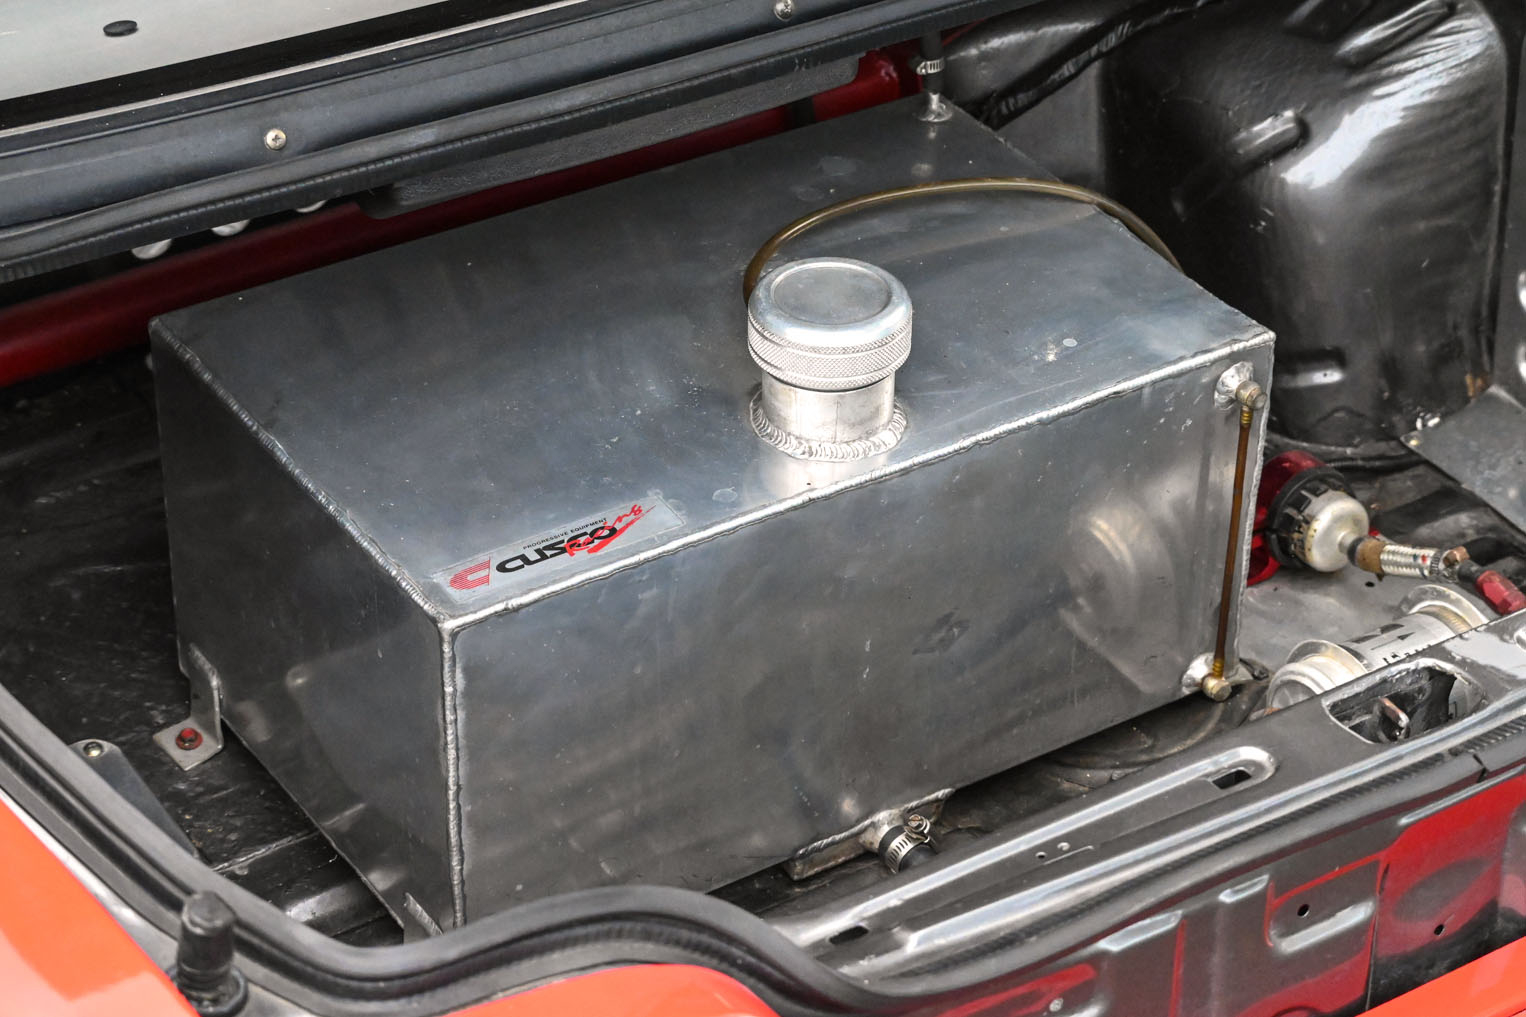 3 Reasons Why You Should Keep Your Fuel Tank Somewhat Full